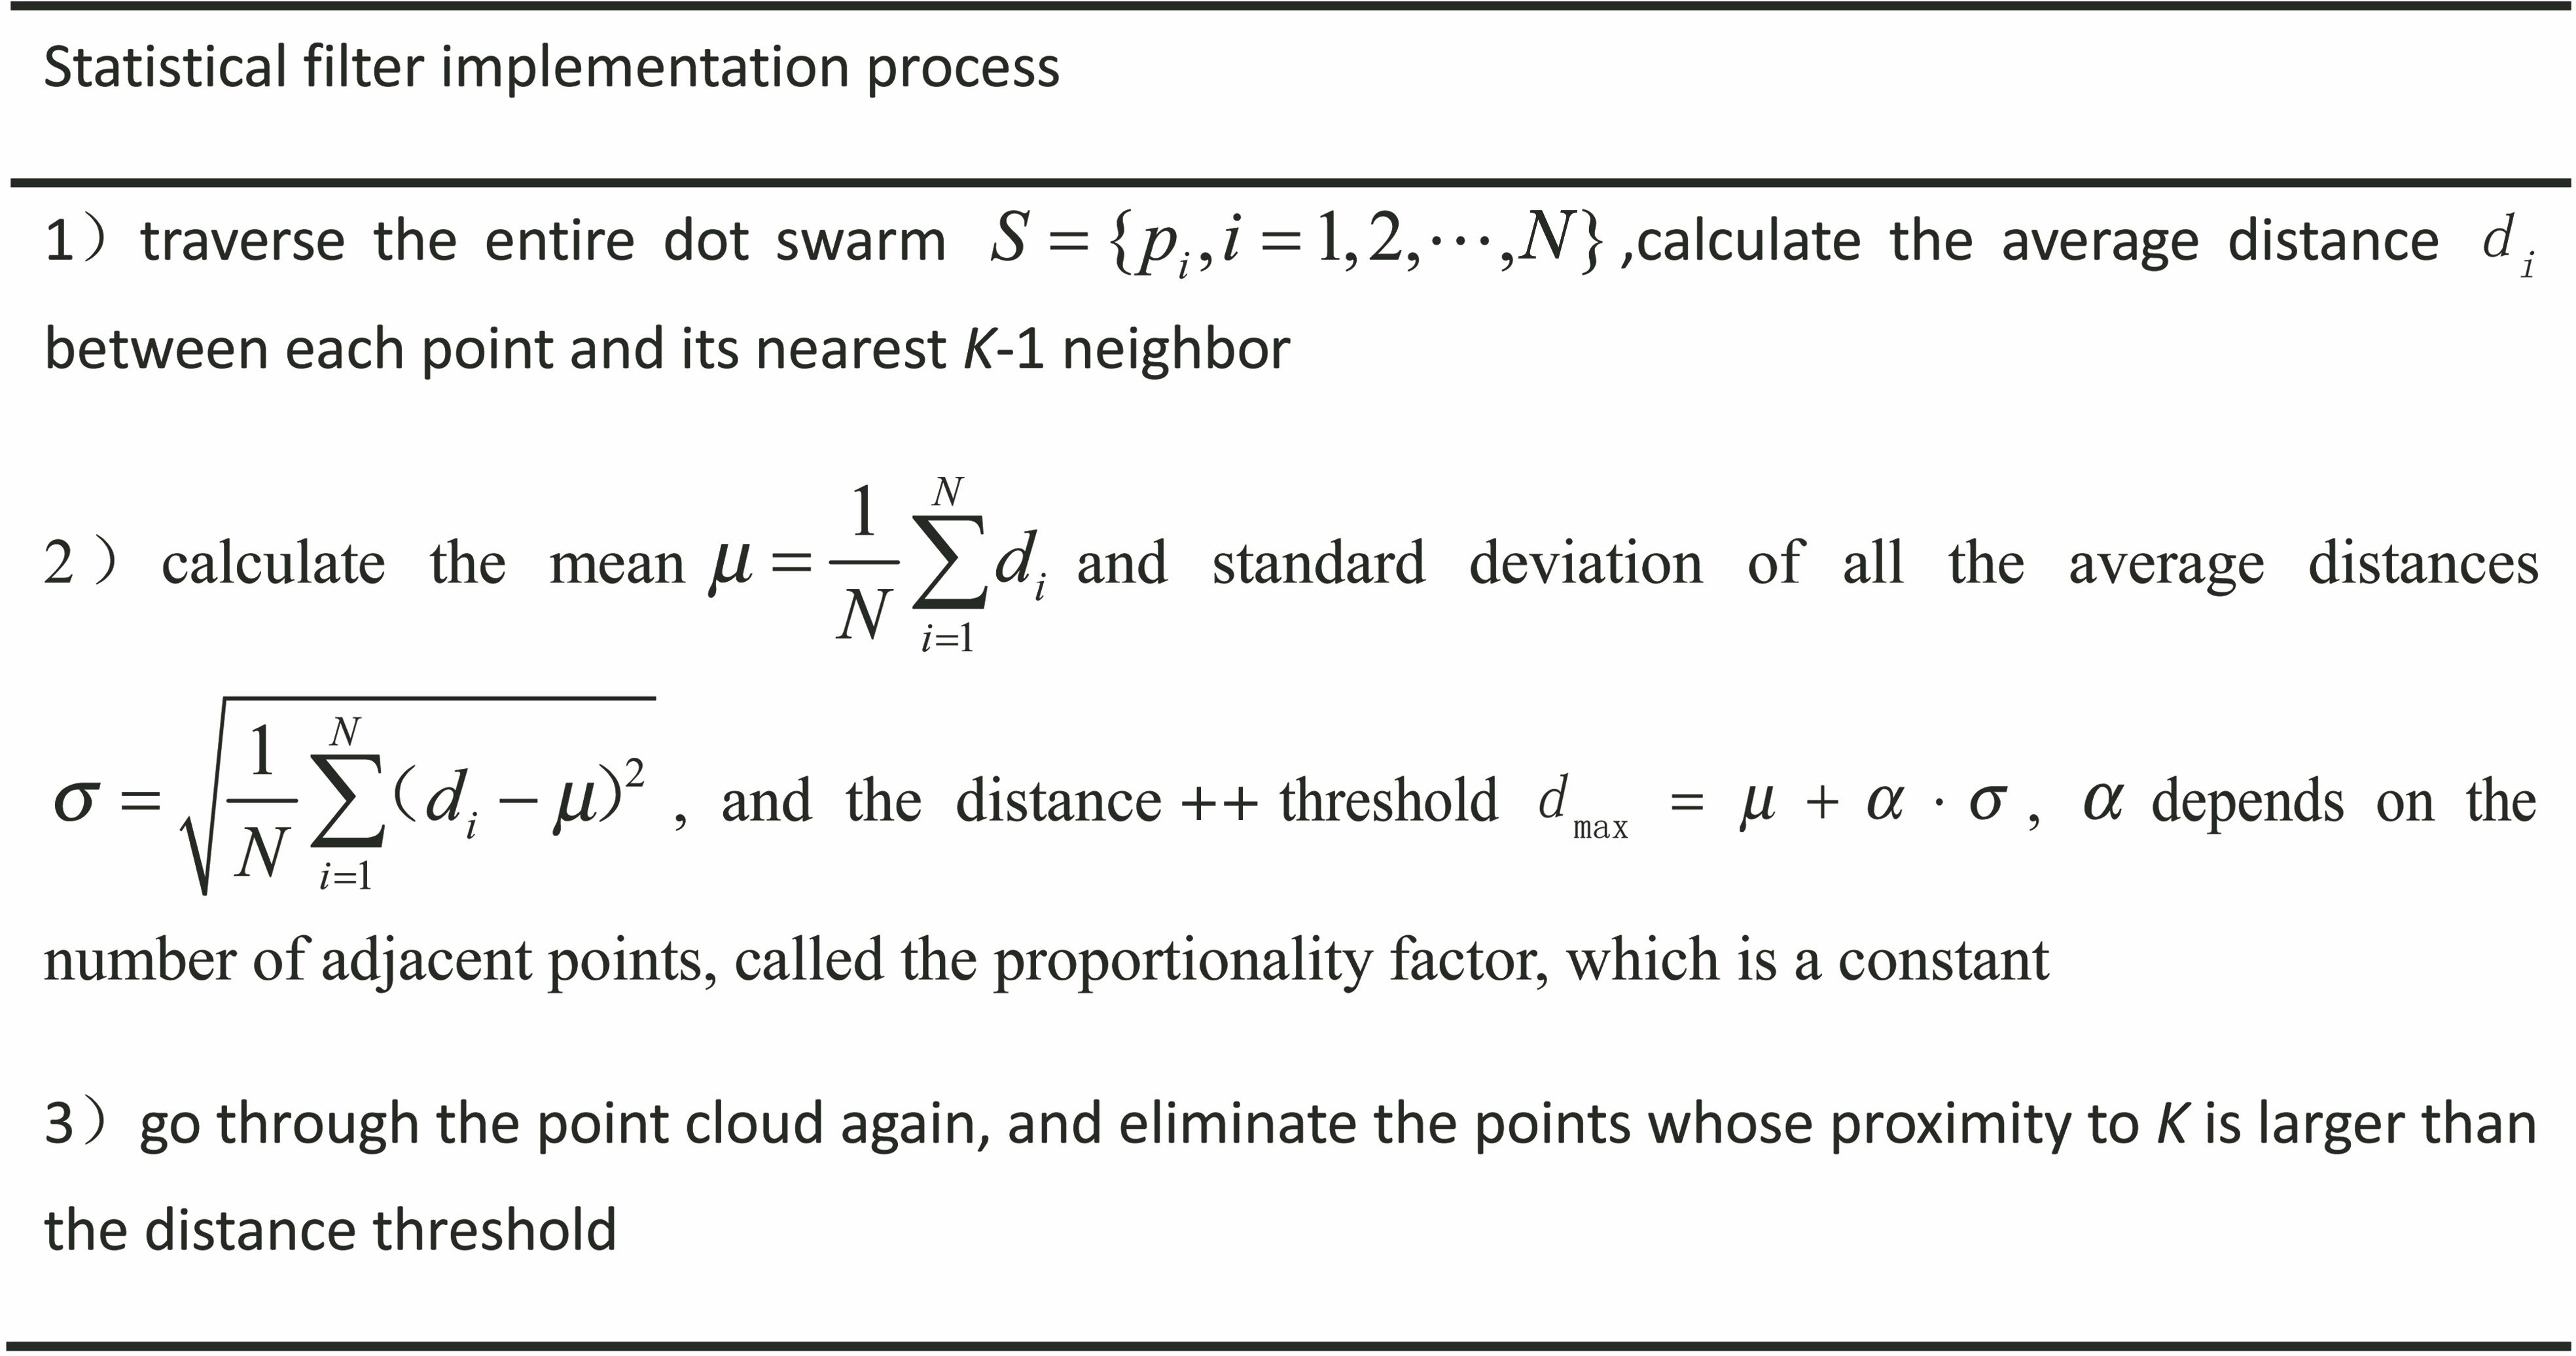 Implementation process of statistical filter